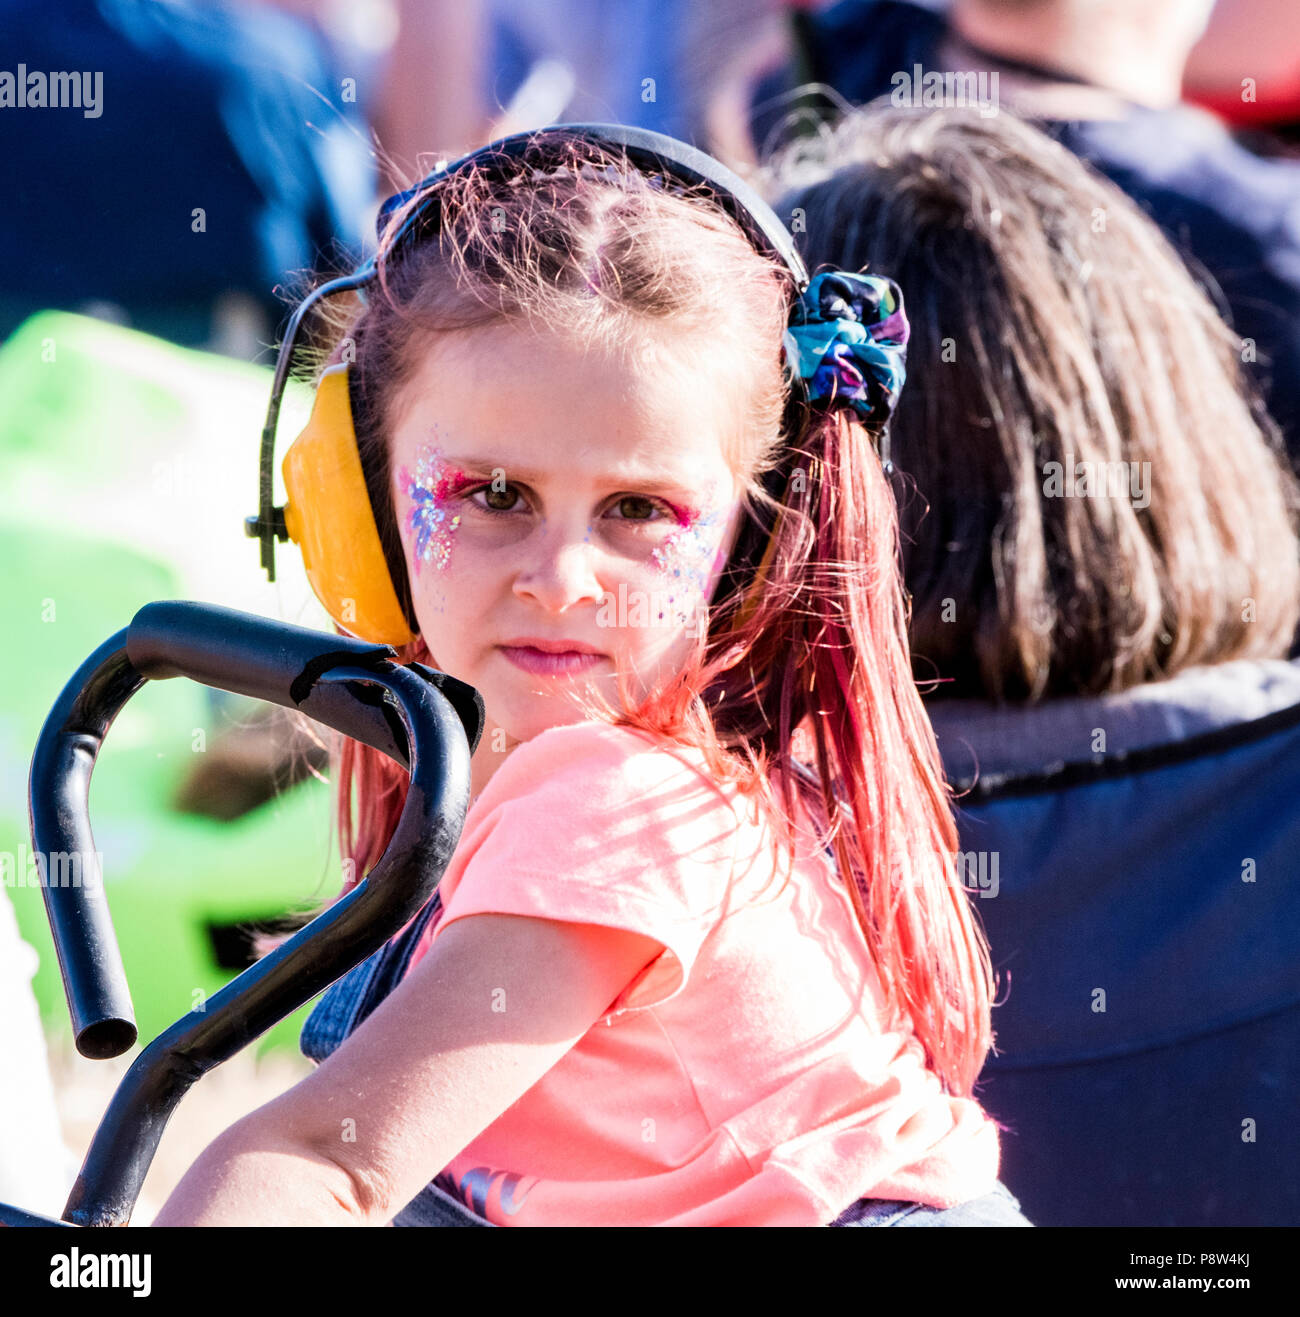 Portrait of young girl with painted face, wearing ear defenders, enjoying the atmosphere at the Obelisk Stage at Latitude Festival, Henham Park, Suffolk, England, 13 July 2018. Stock Photo